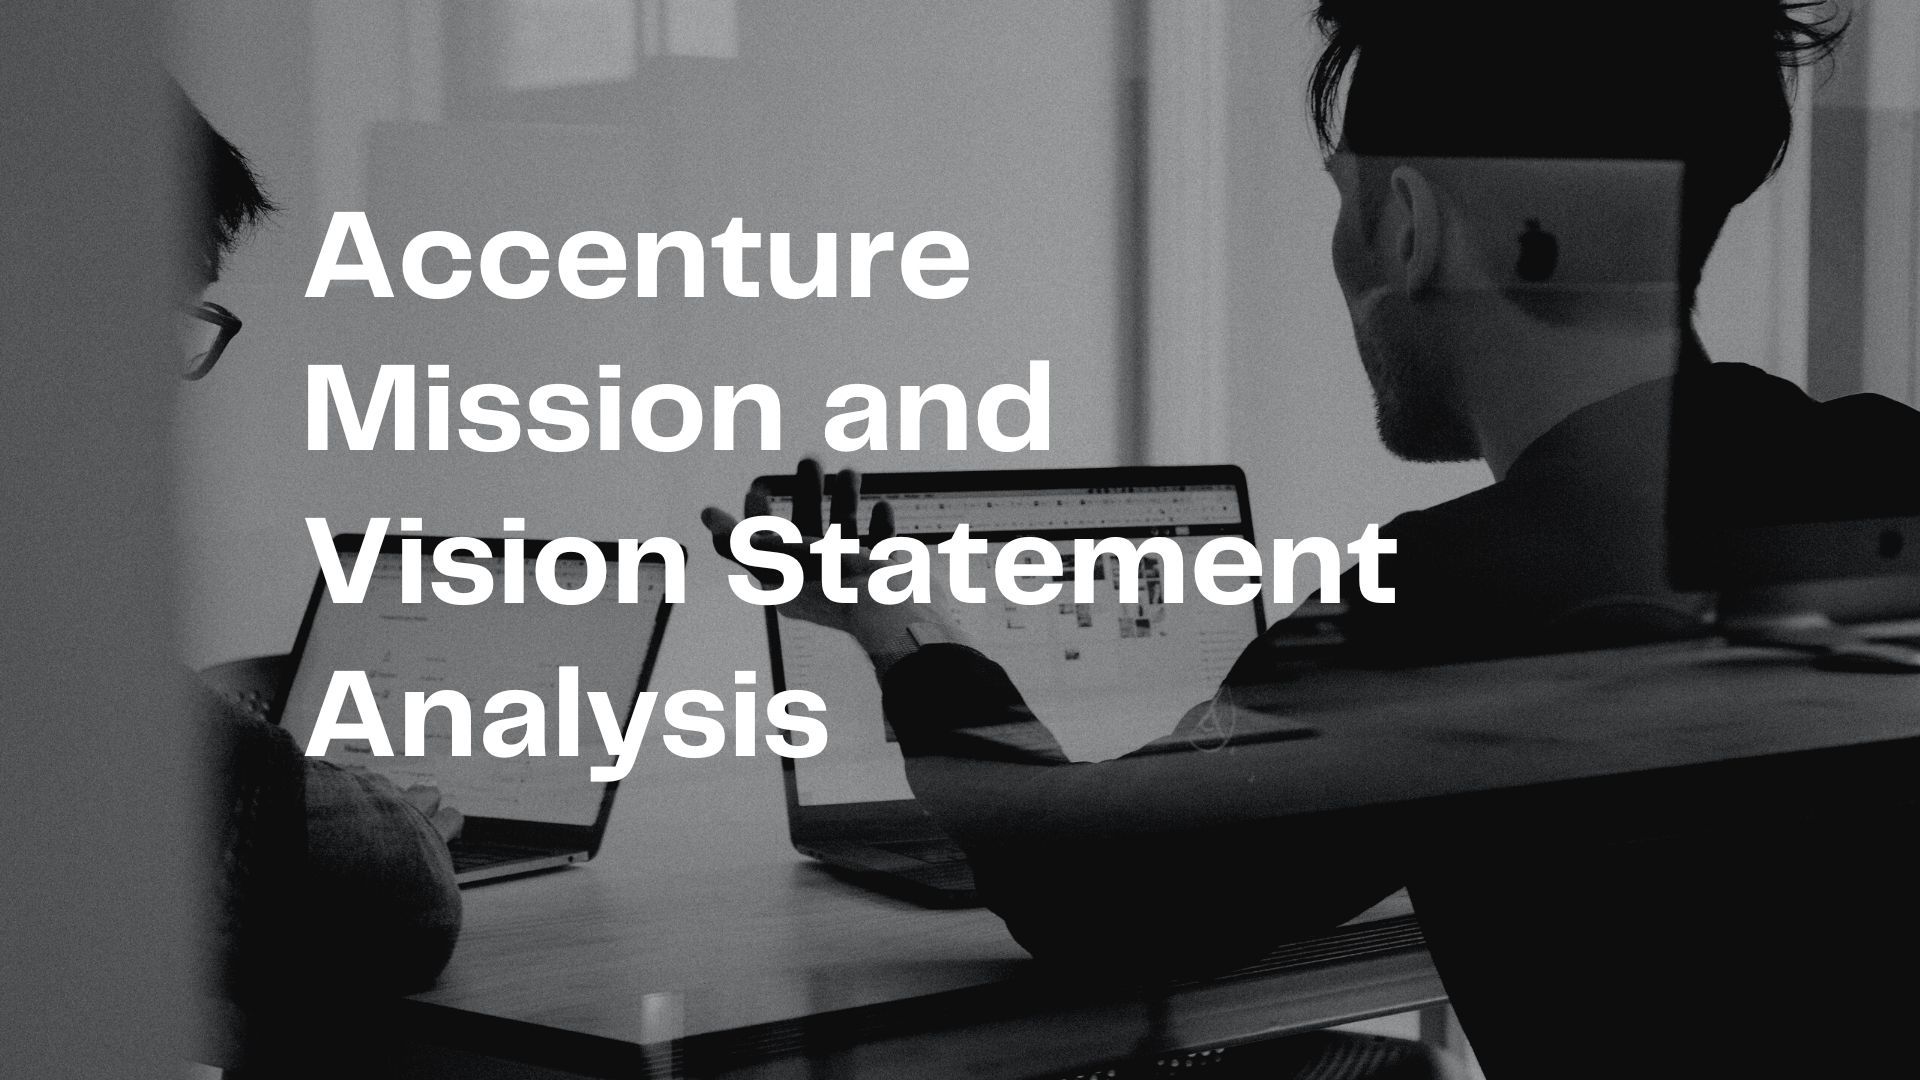 Accenture Mission and Vision Statement Analysis.jpg